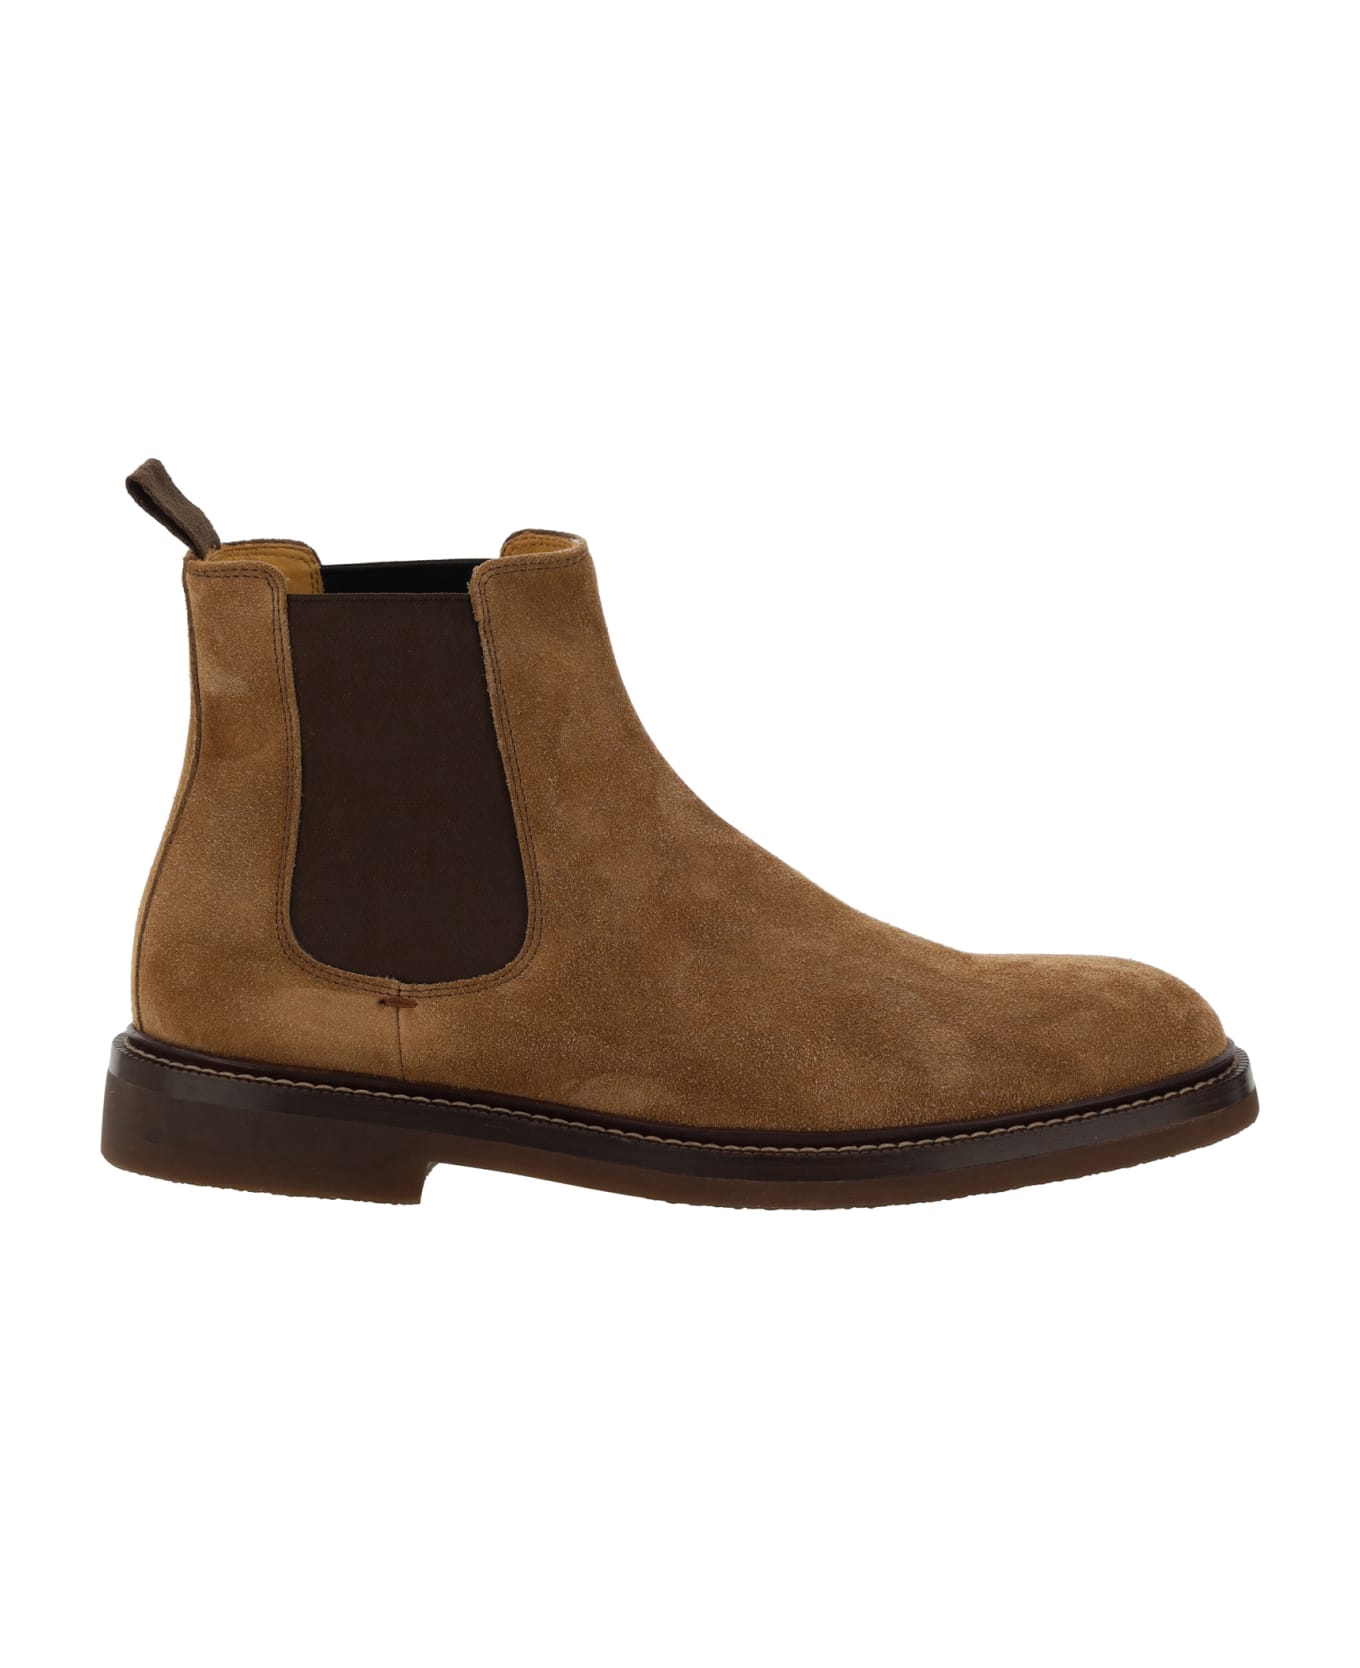 Brunello Cucinelli Ankle Boots - C8831 ブーツ